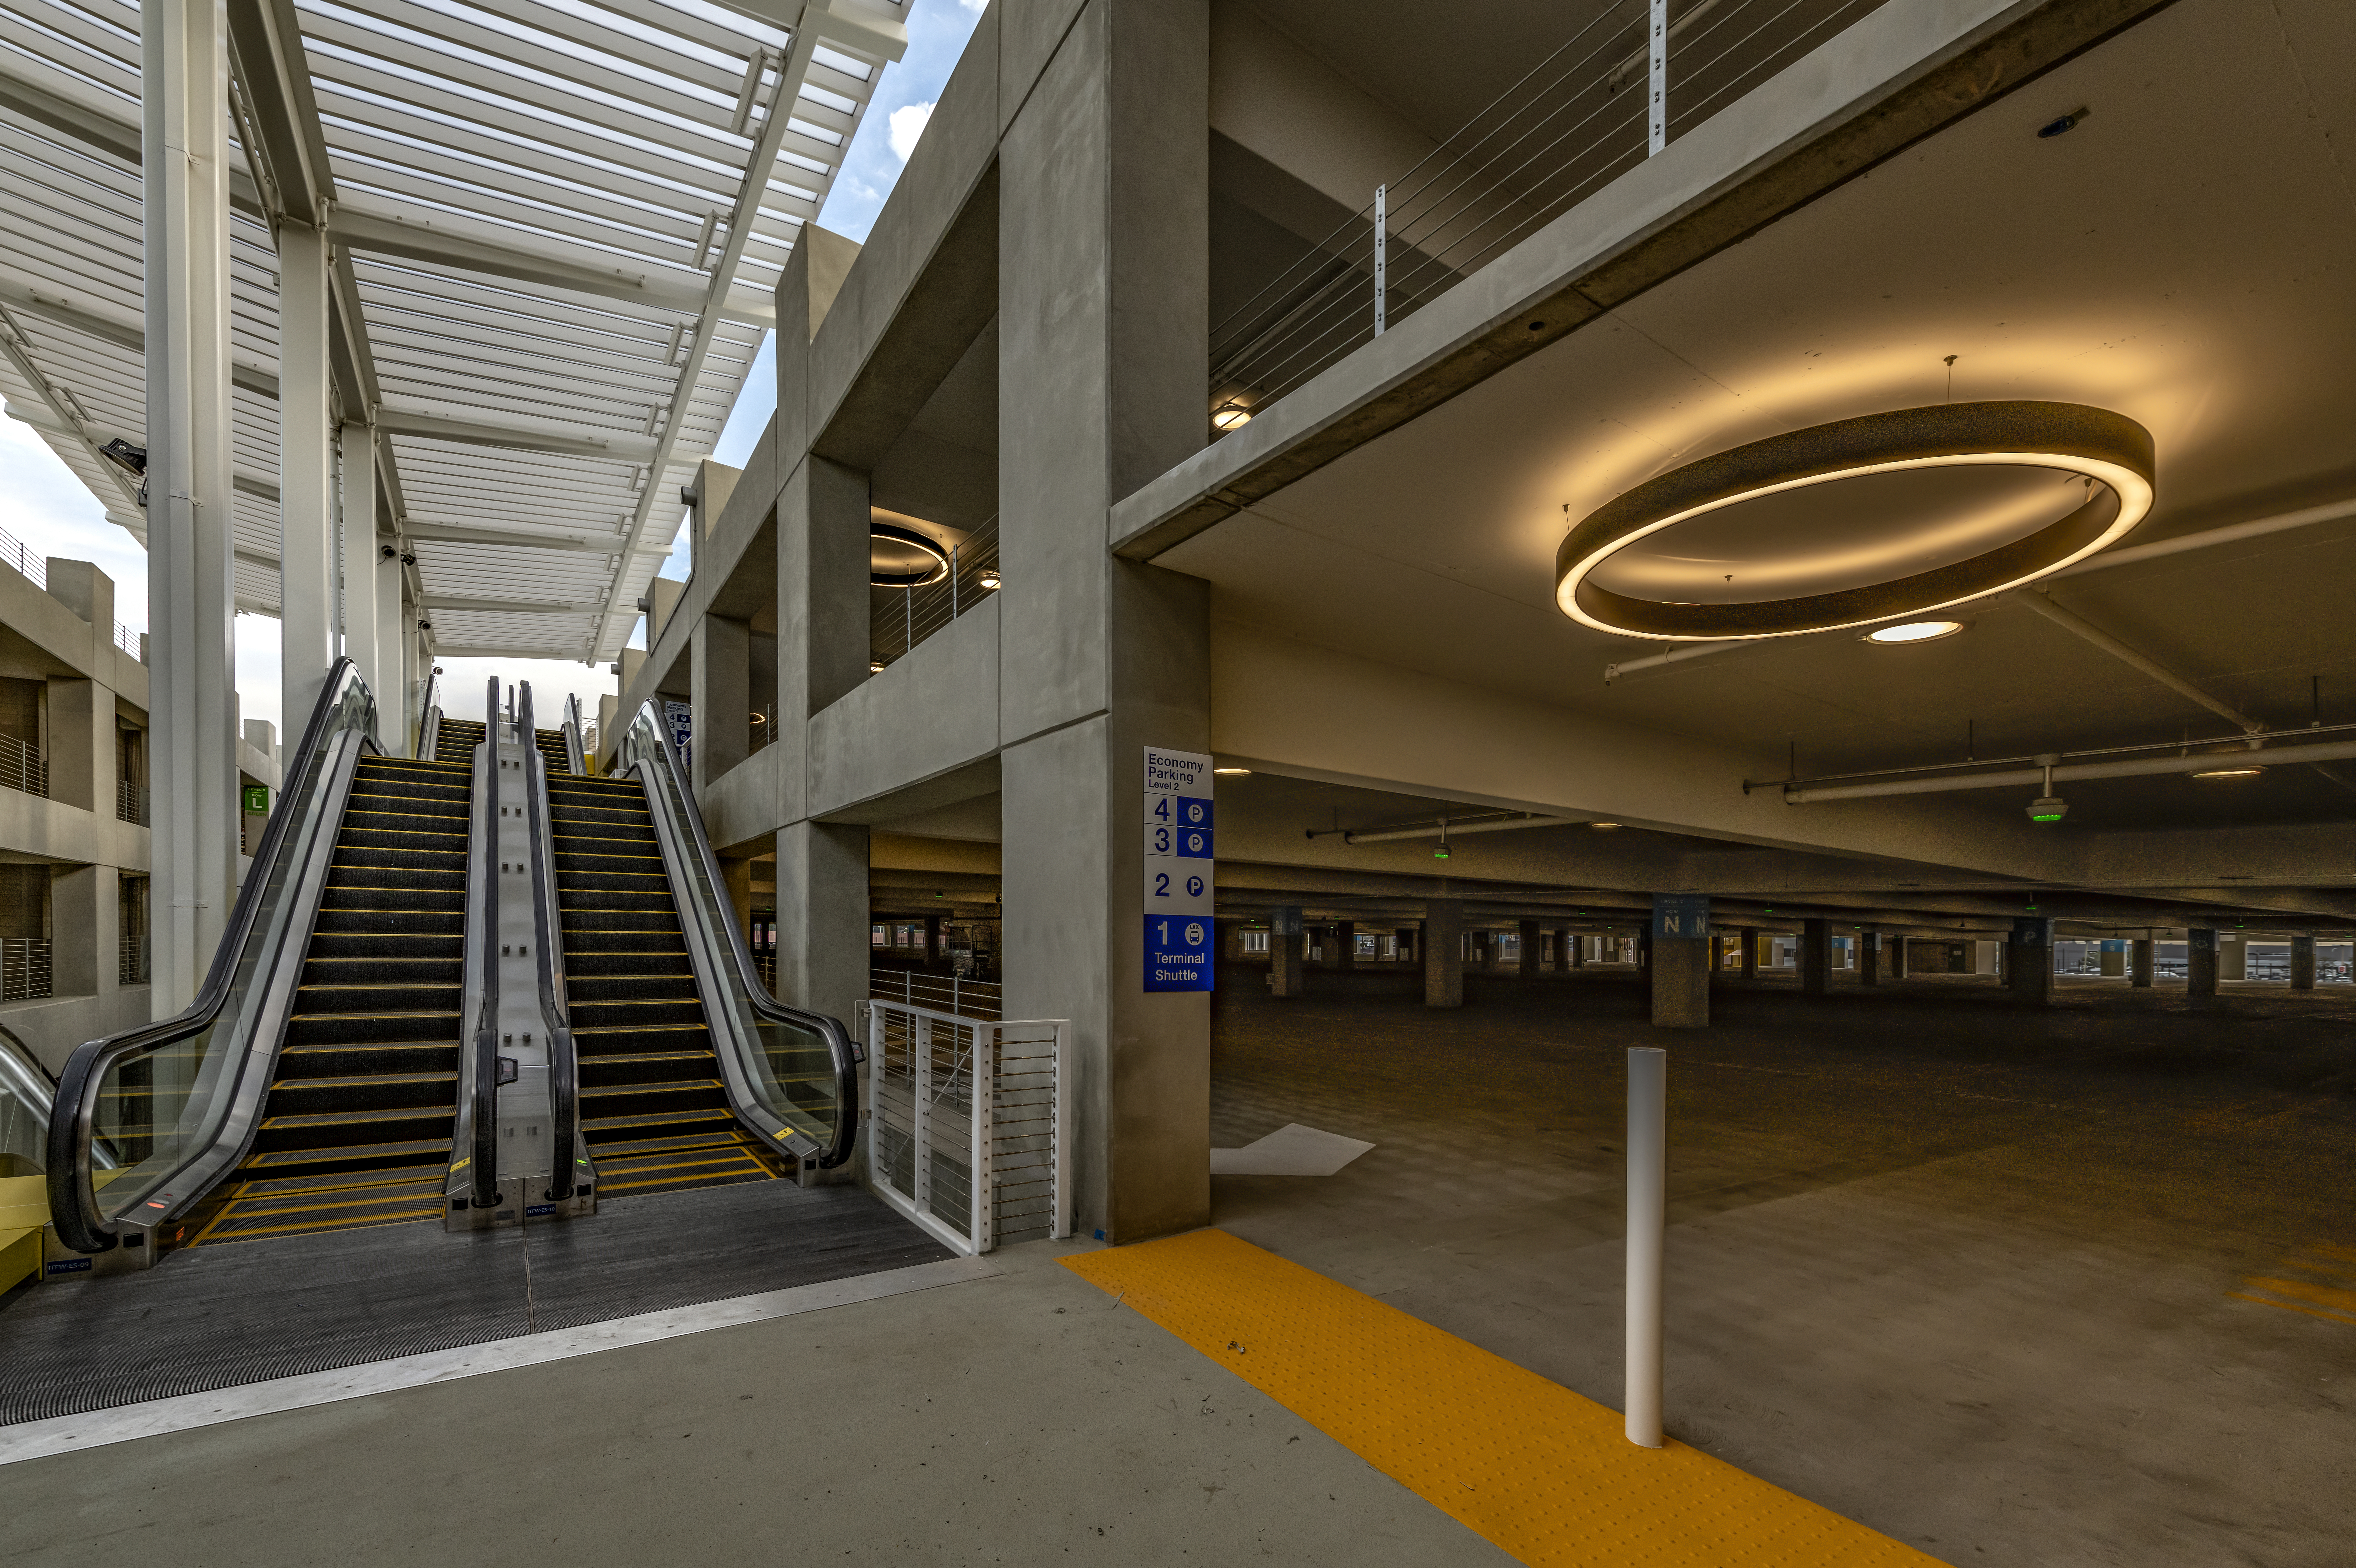 An interior view of the LAX Economy Parking facility.